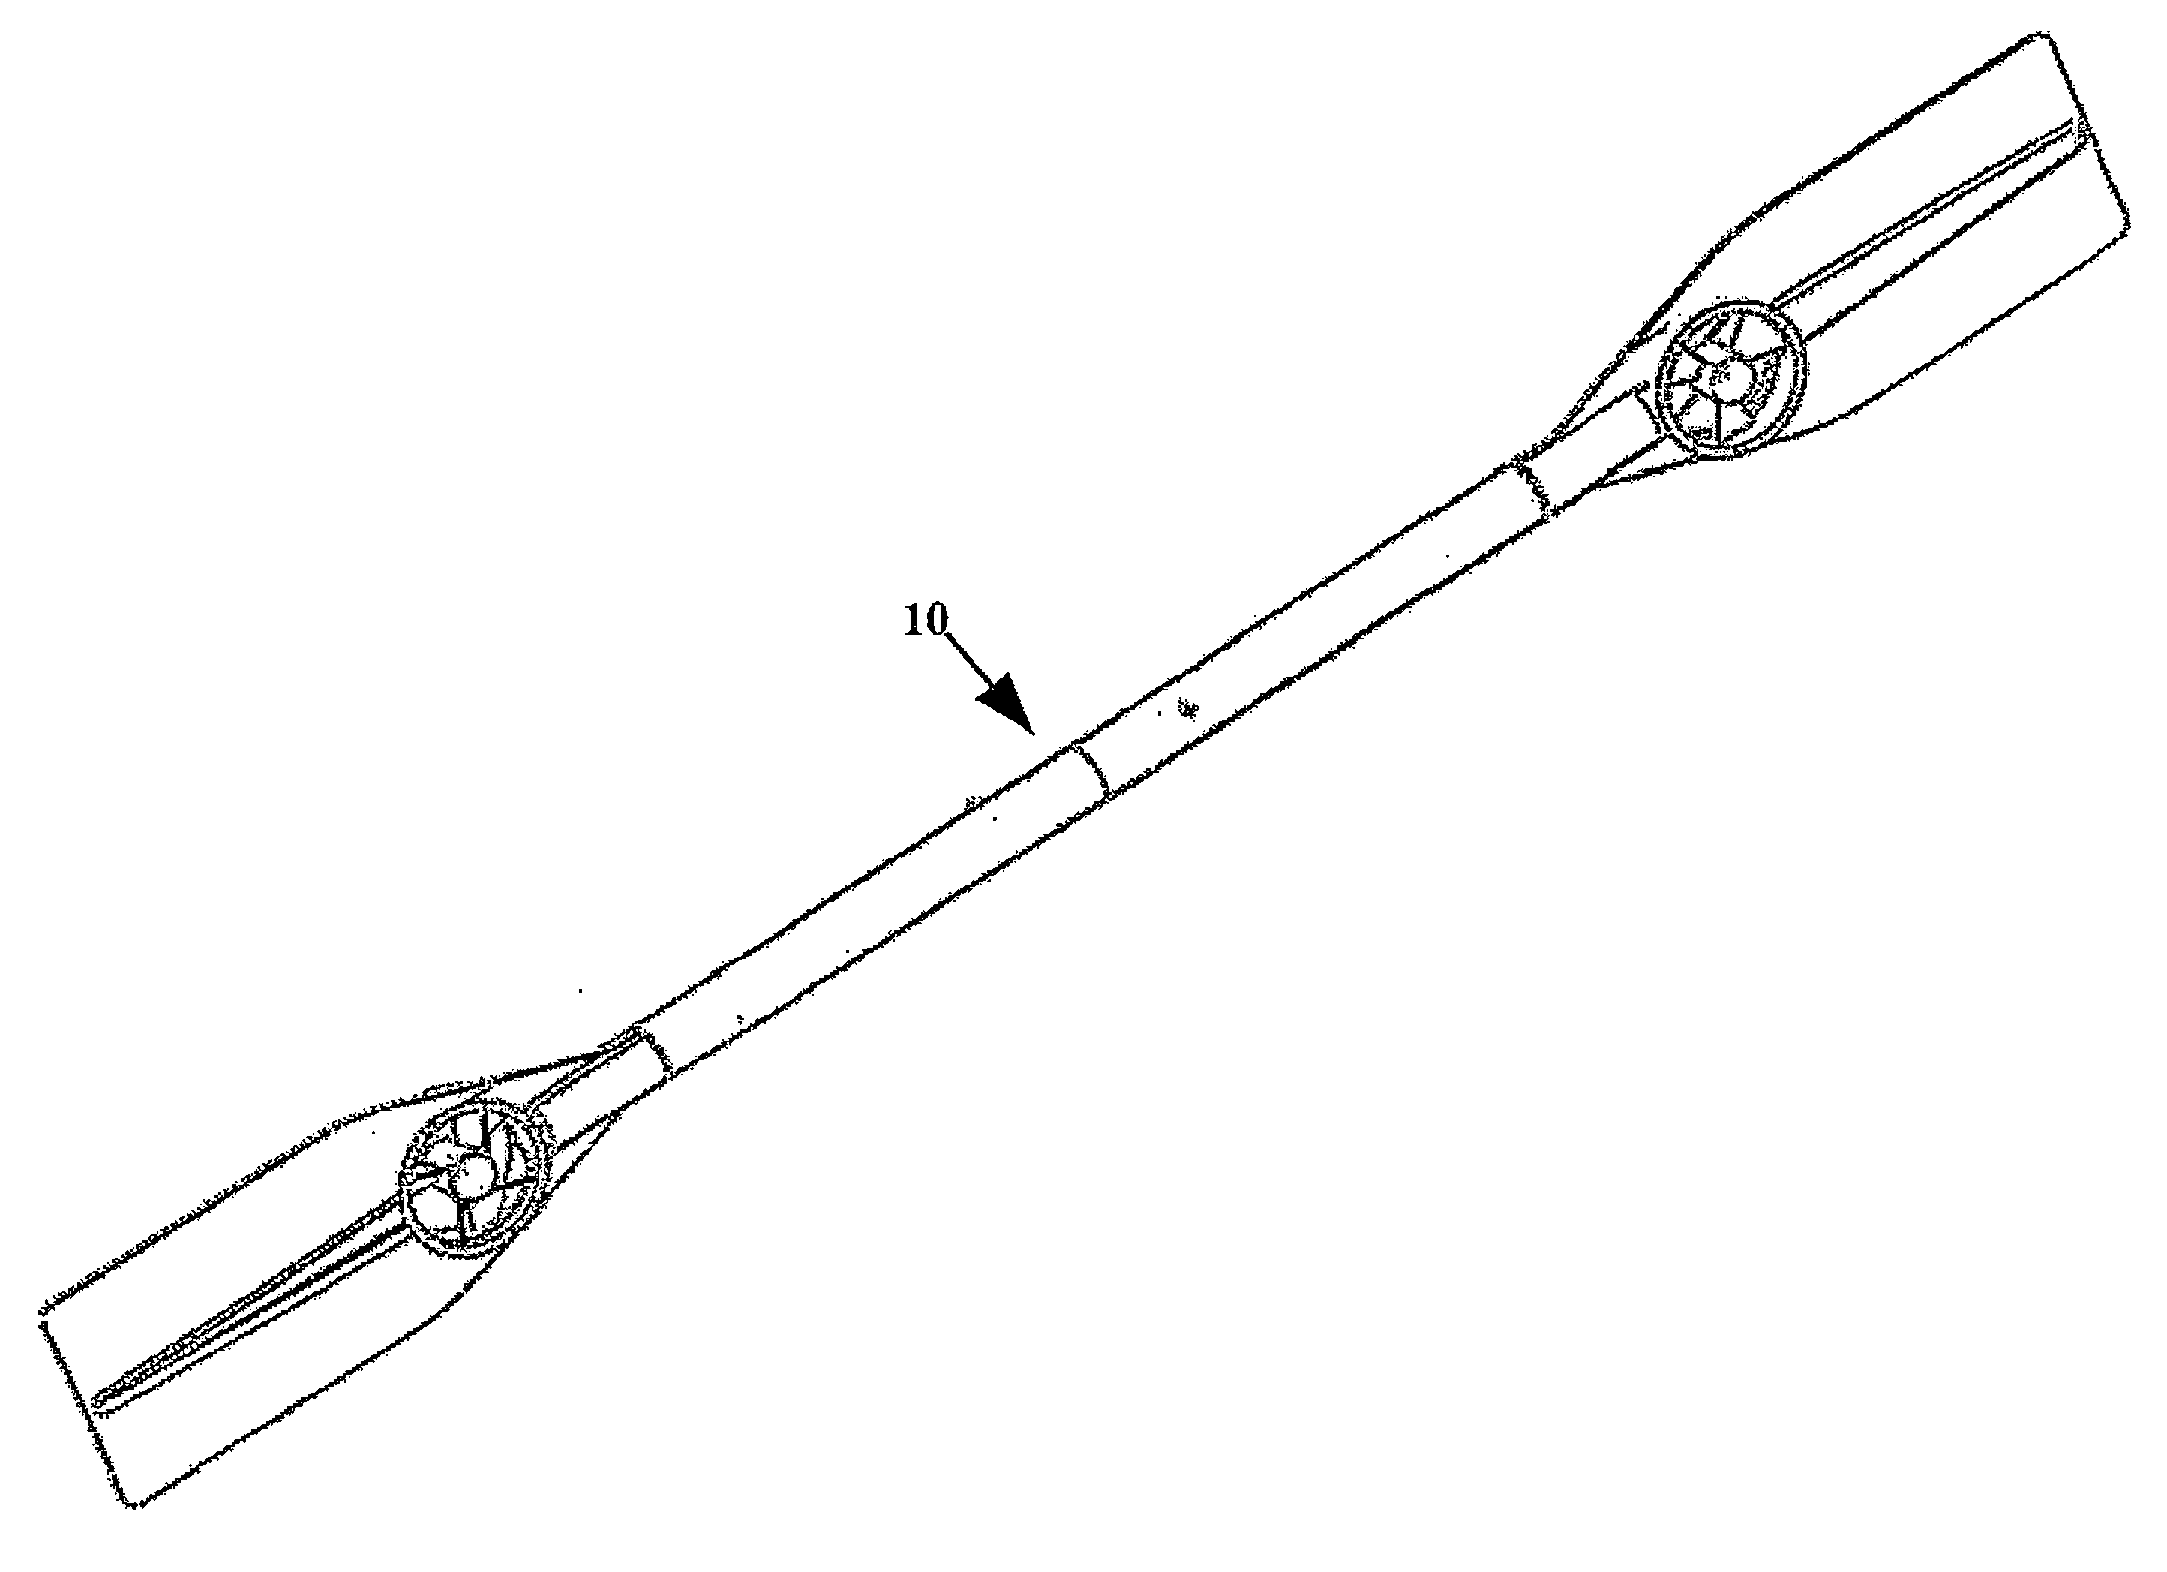 Combination hand-held multi-directional propulsion device, and powered oar/paddle for rowboat, canoe, kayak, and the like